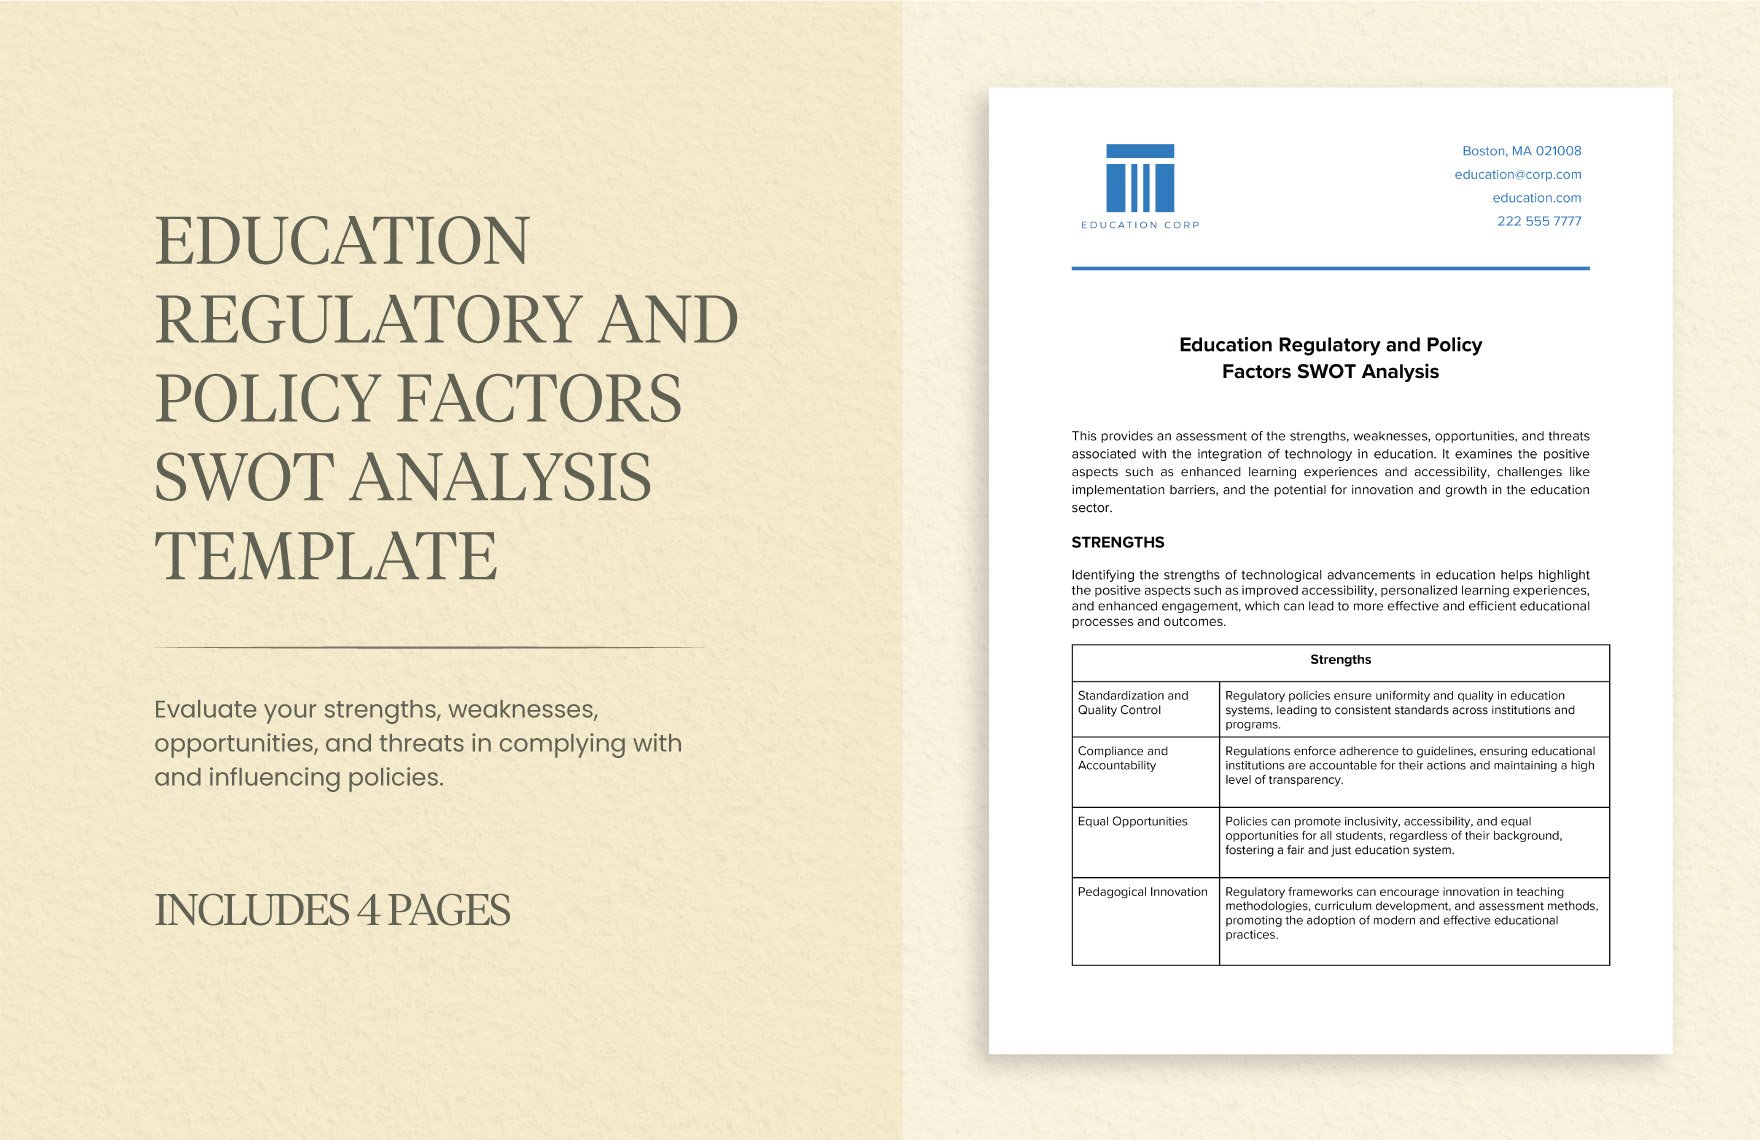 Education Regulatory and Policy Factors SWOT Analysis Template